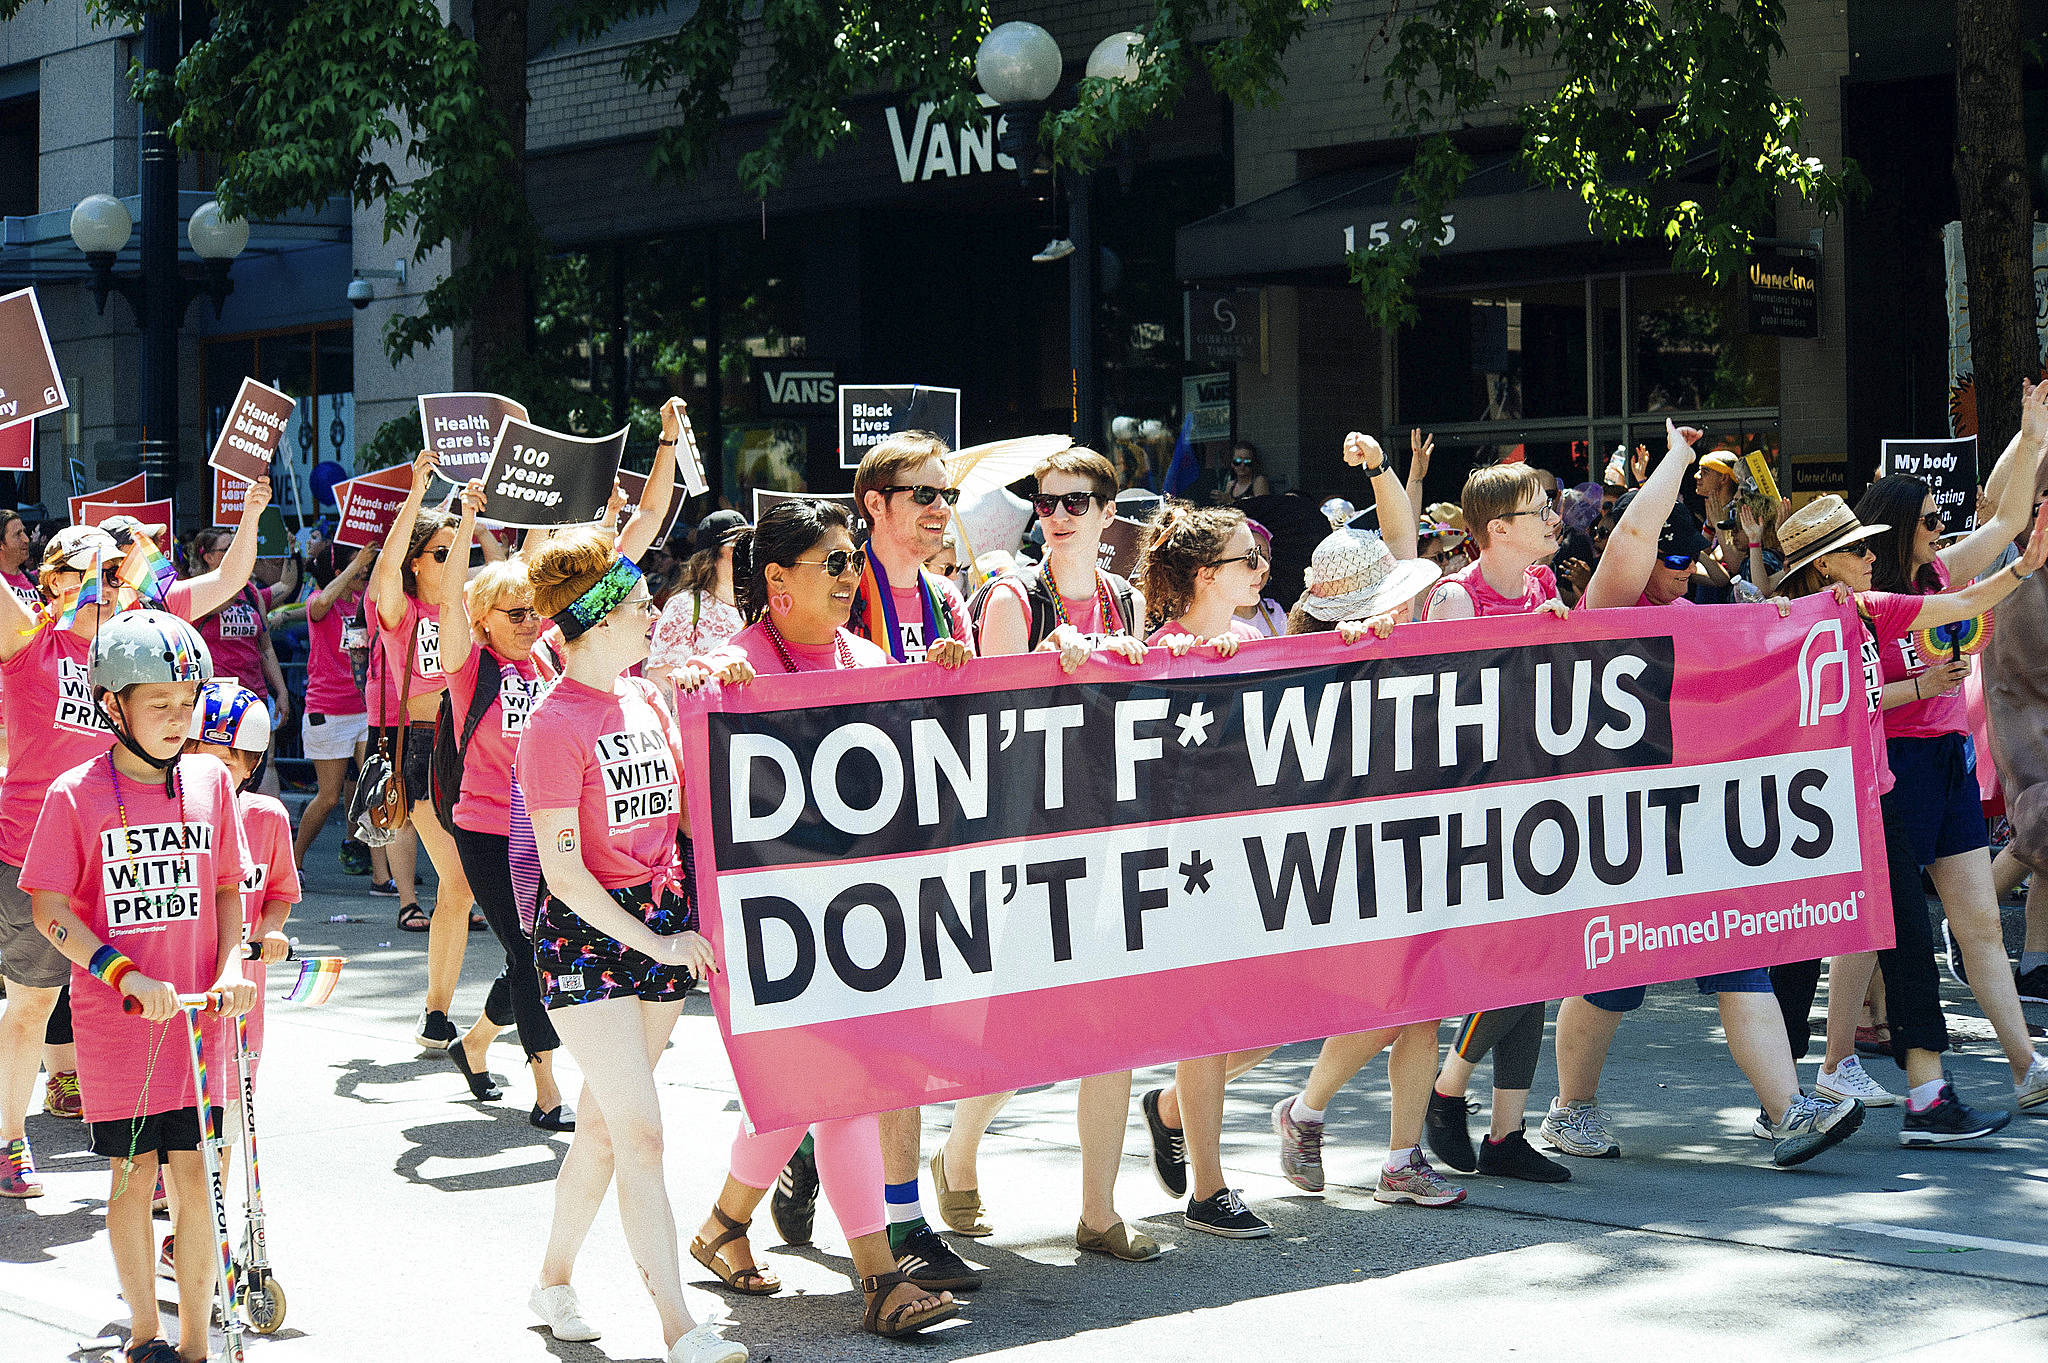 Reproductive rights marchers during the 2017 Seattle Pride Parade. Photo by Bobby Arispe Jr./Flickr